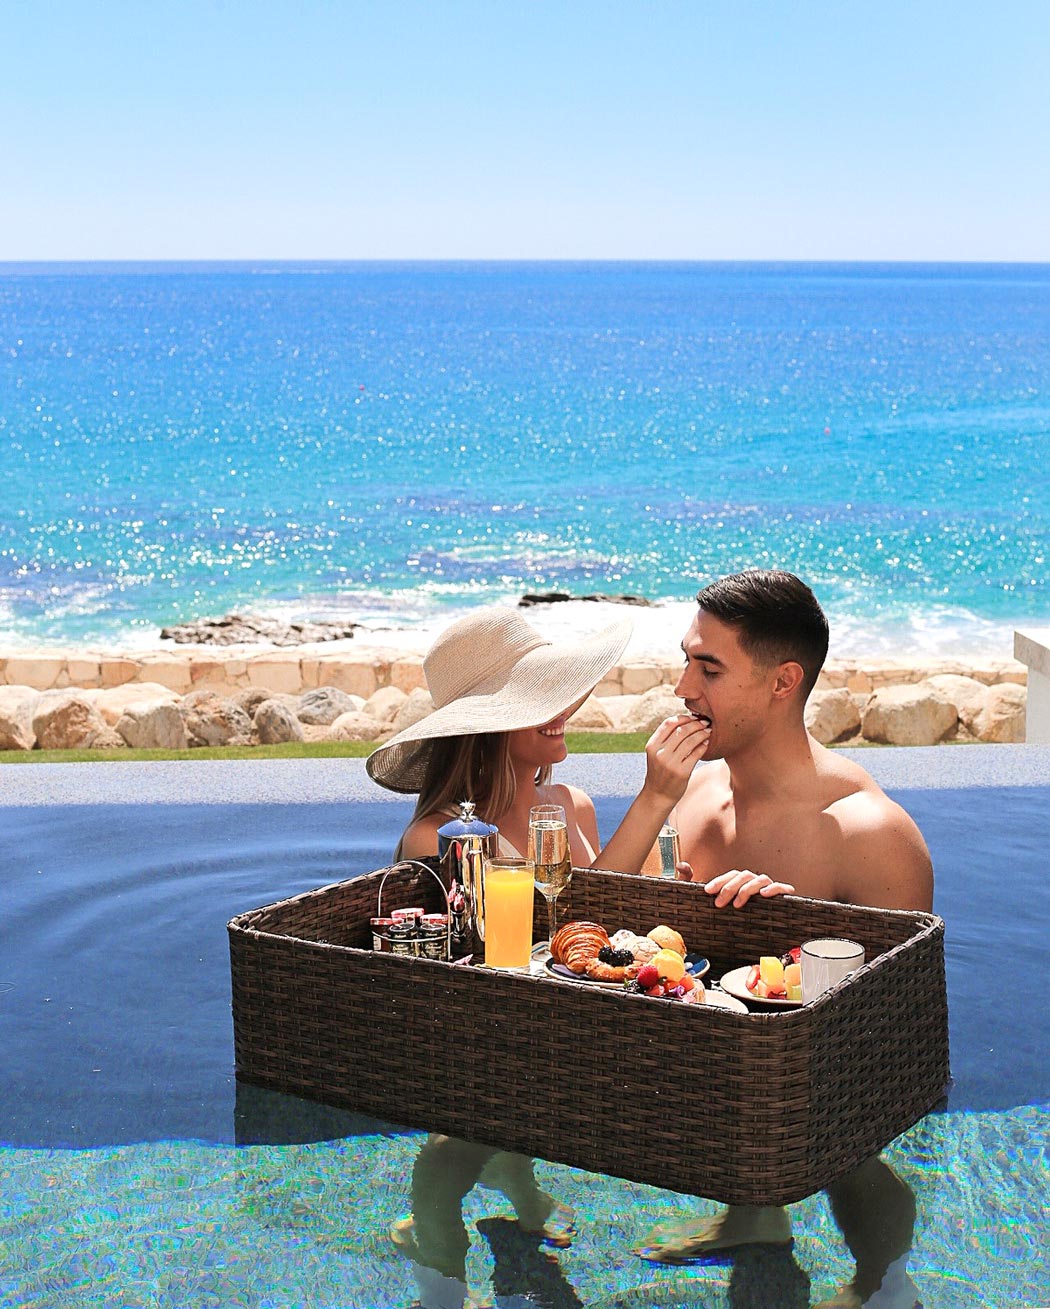 A couple enjoy a floating breakfast in their private pool at Hilton Los Cabos.